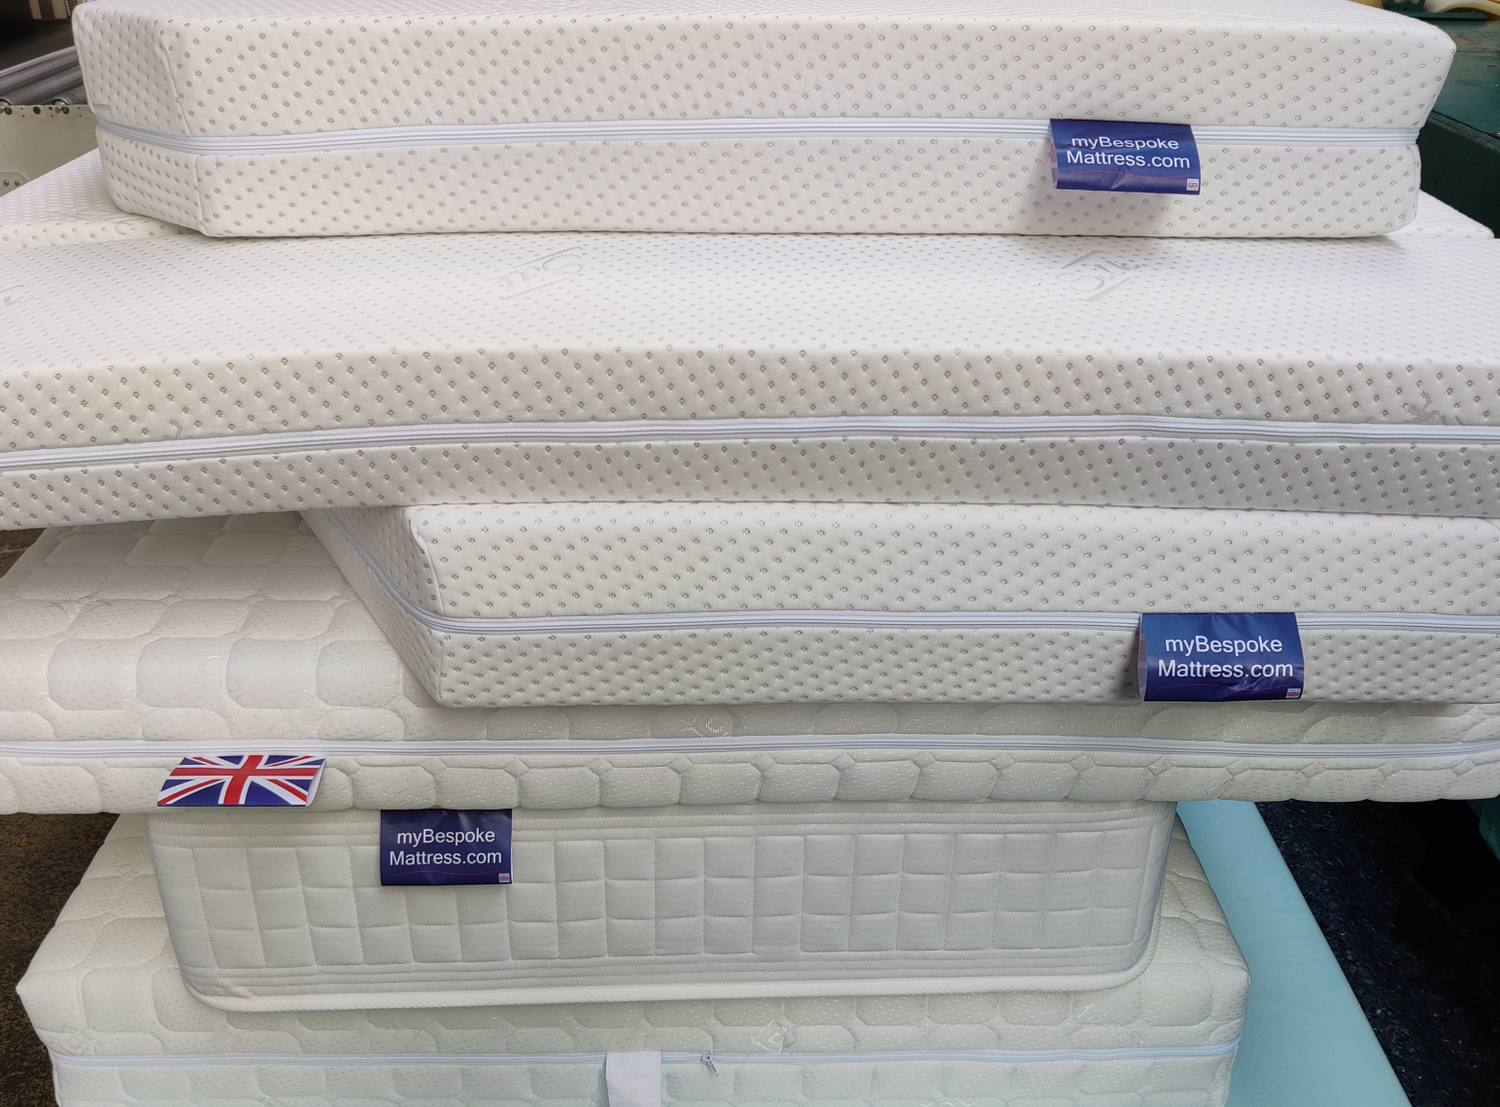 A big stack of custom size mattresses made for customers by Mybespokemattress